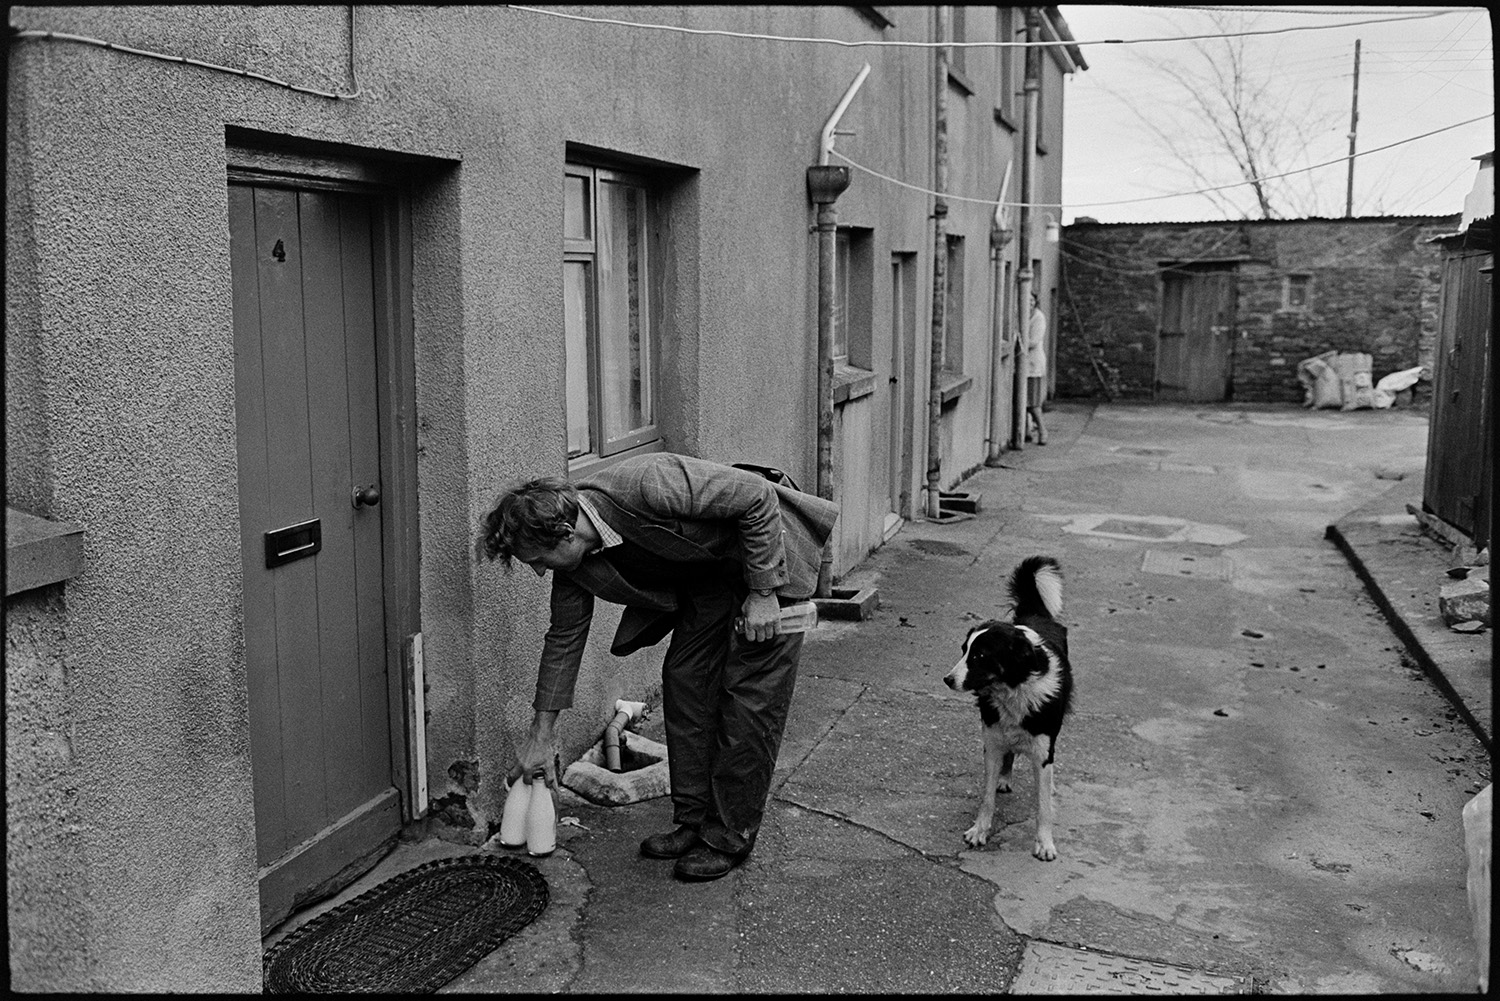 Milkman farmer on his last round in village, chatting as he delivers bottles from van.
[Ivor Bourne of Jeffrys Farm placing two bottles of milk in front of a house in Beaford. A dog is watching him and terrace of houses is visible in the background.]